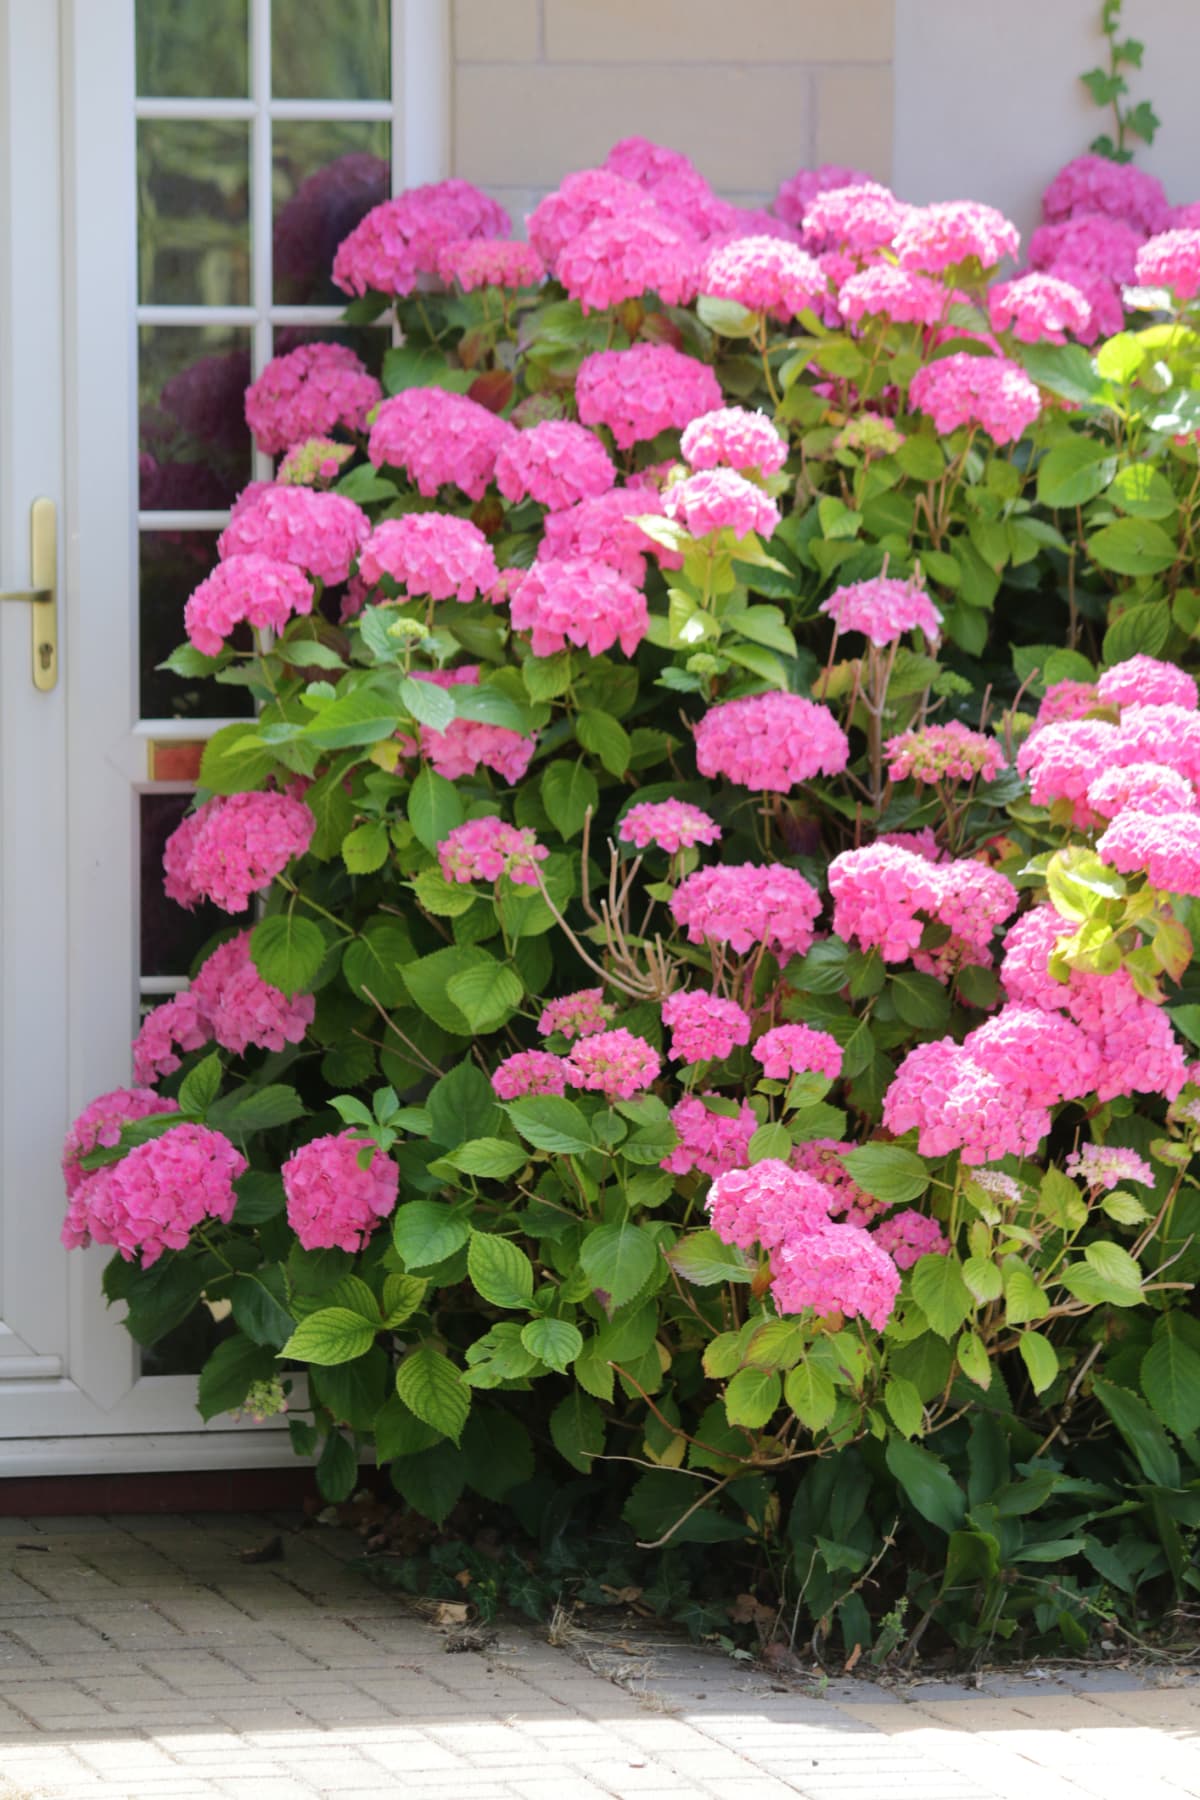 Large hydrangea shrub growing in sunny summer garden covered with large pink flowers